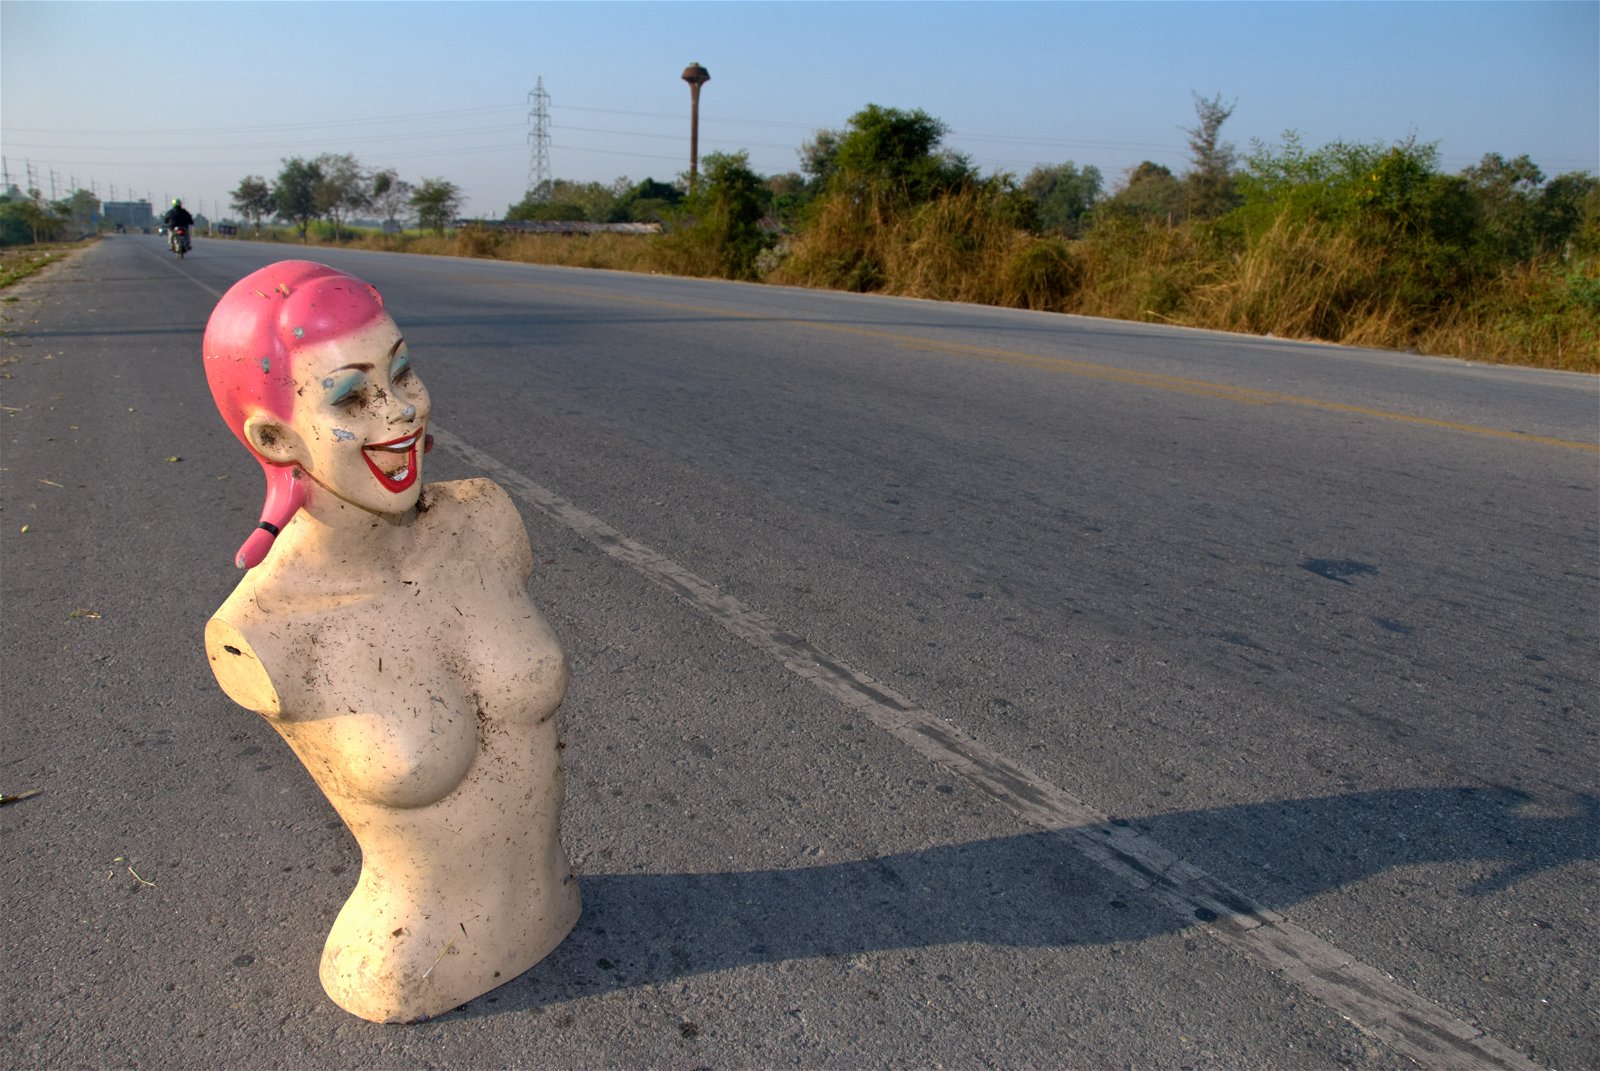 Mannequin on the space at the side of an empty road.